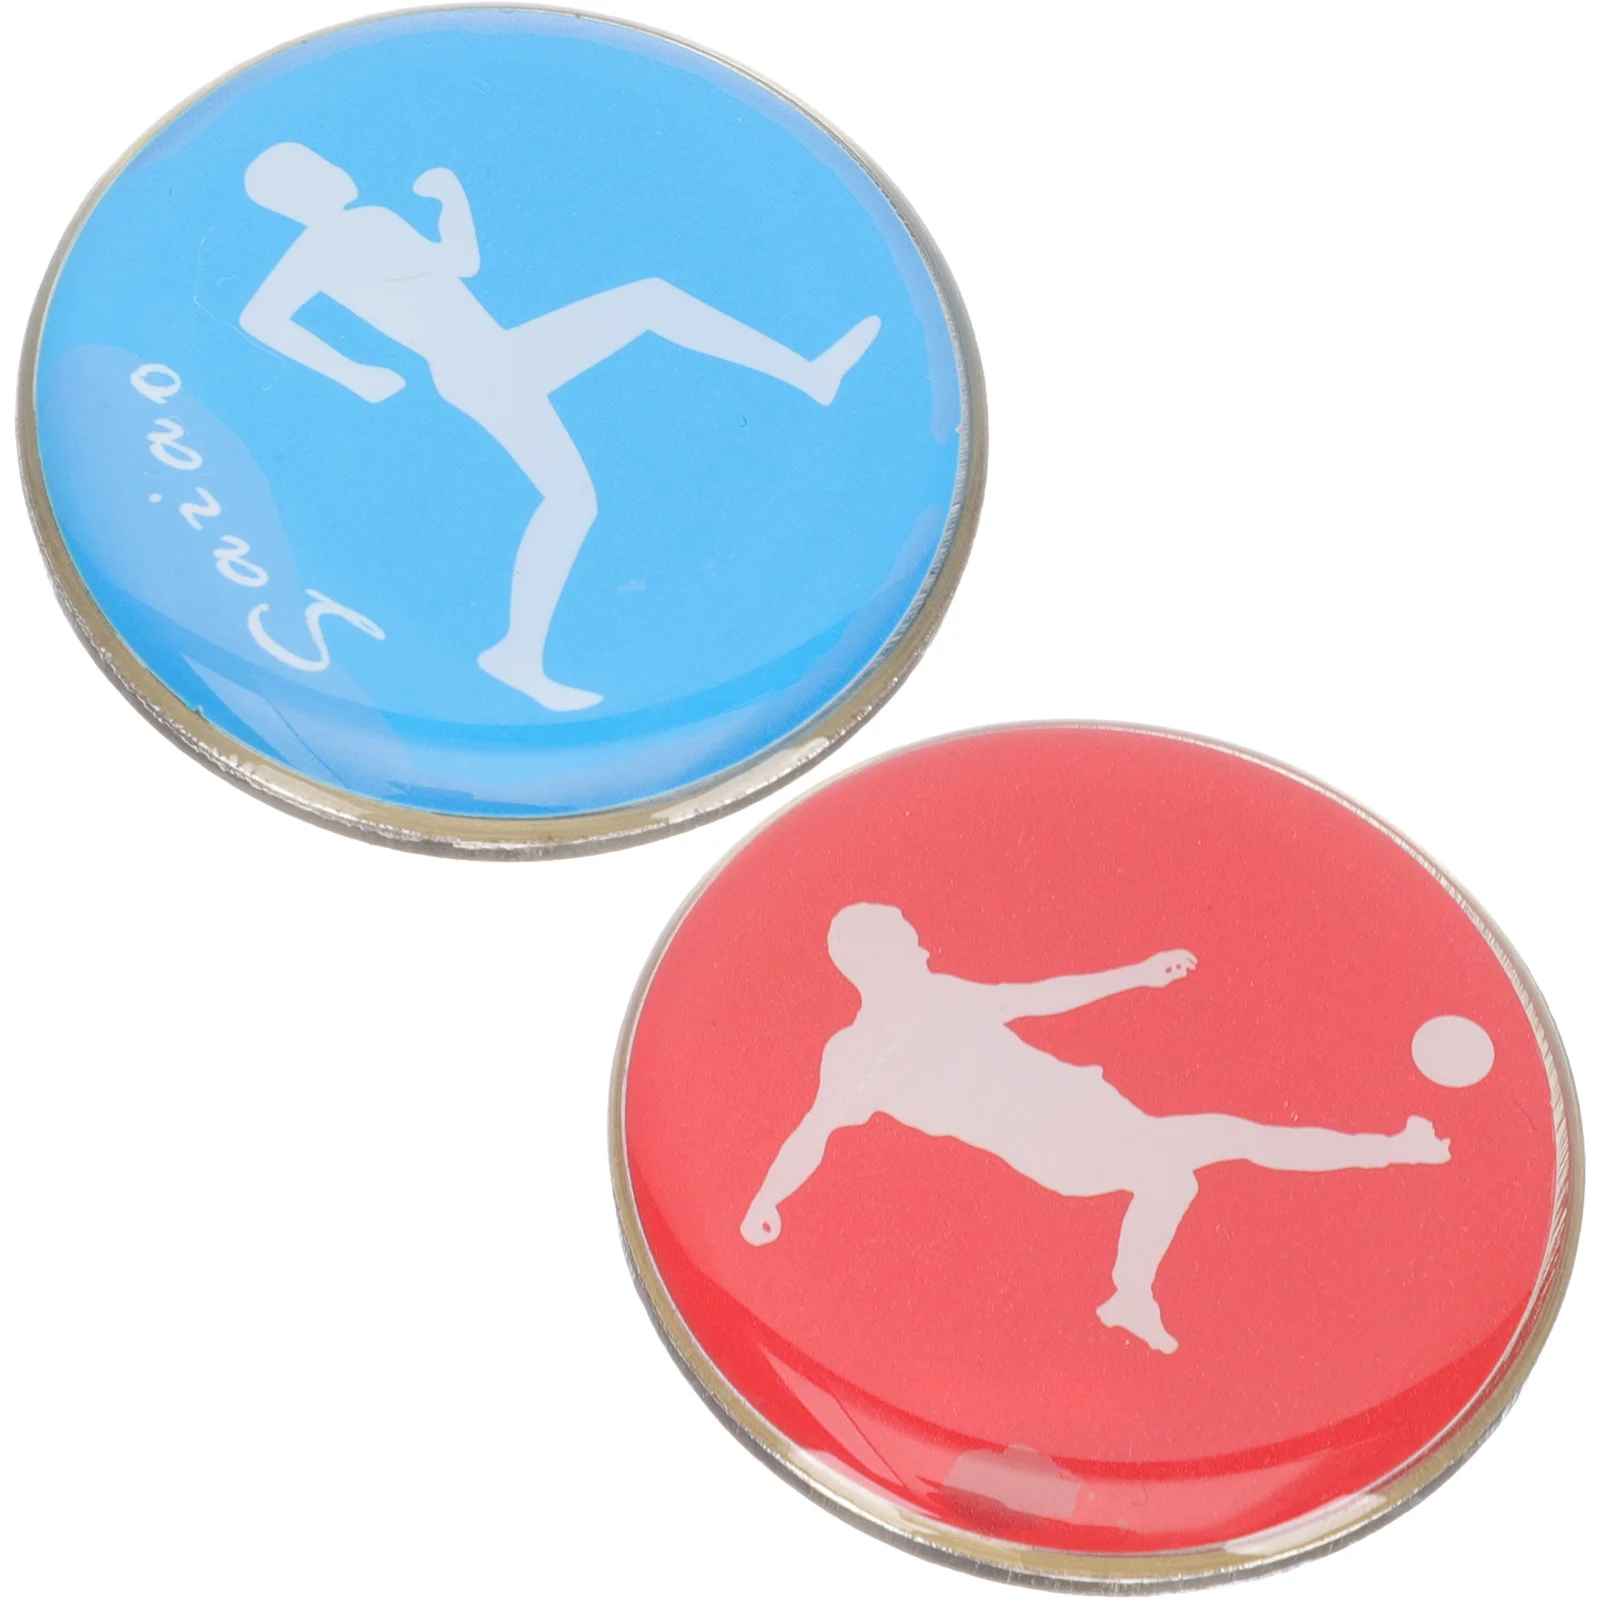 

2 Pcs Side Coin Volleyball Referee Flip Coins Toss Badminton Metal Convenient Competition Judge